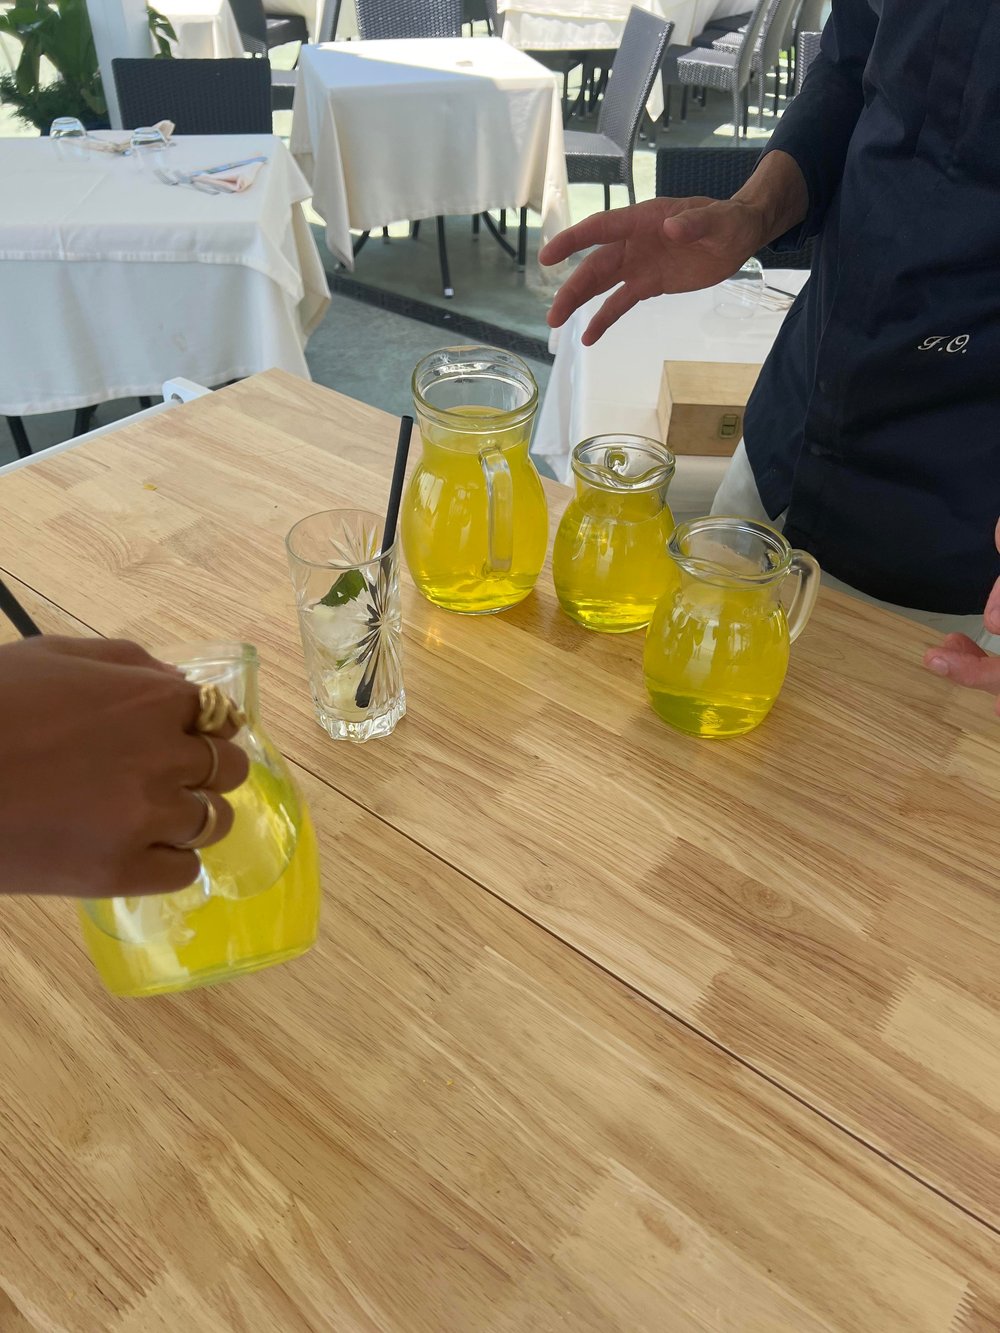 Pour one part of limoncello into the glass